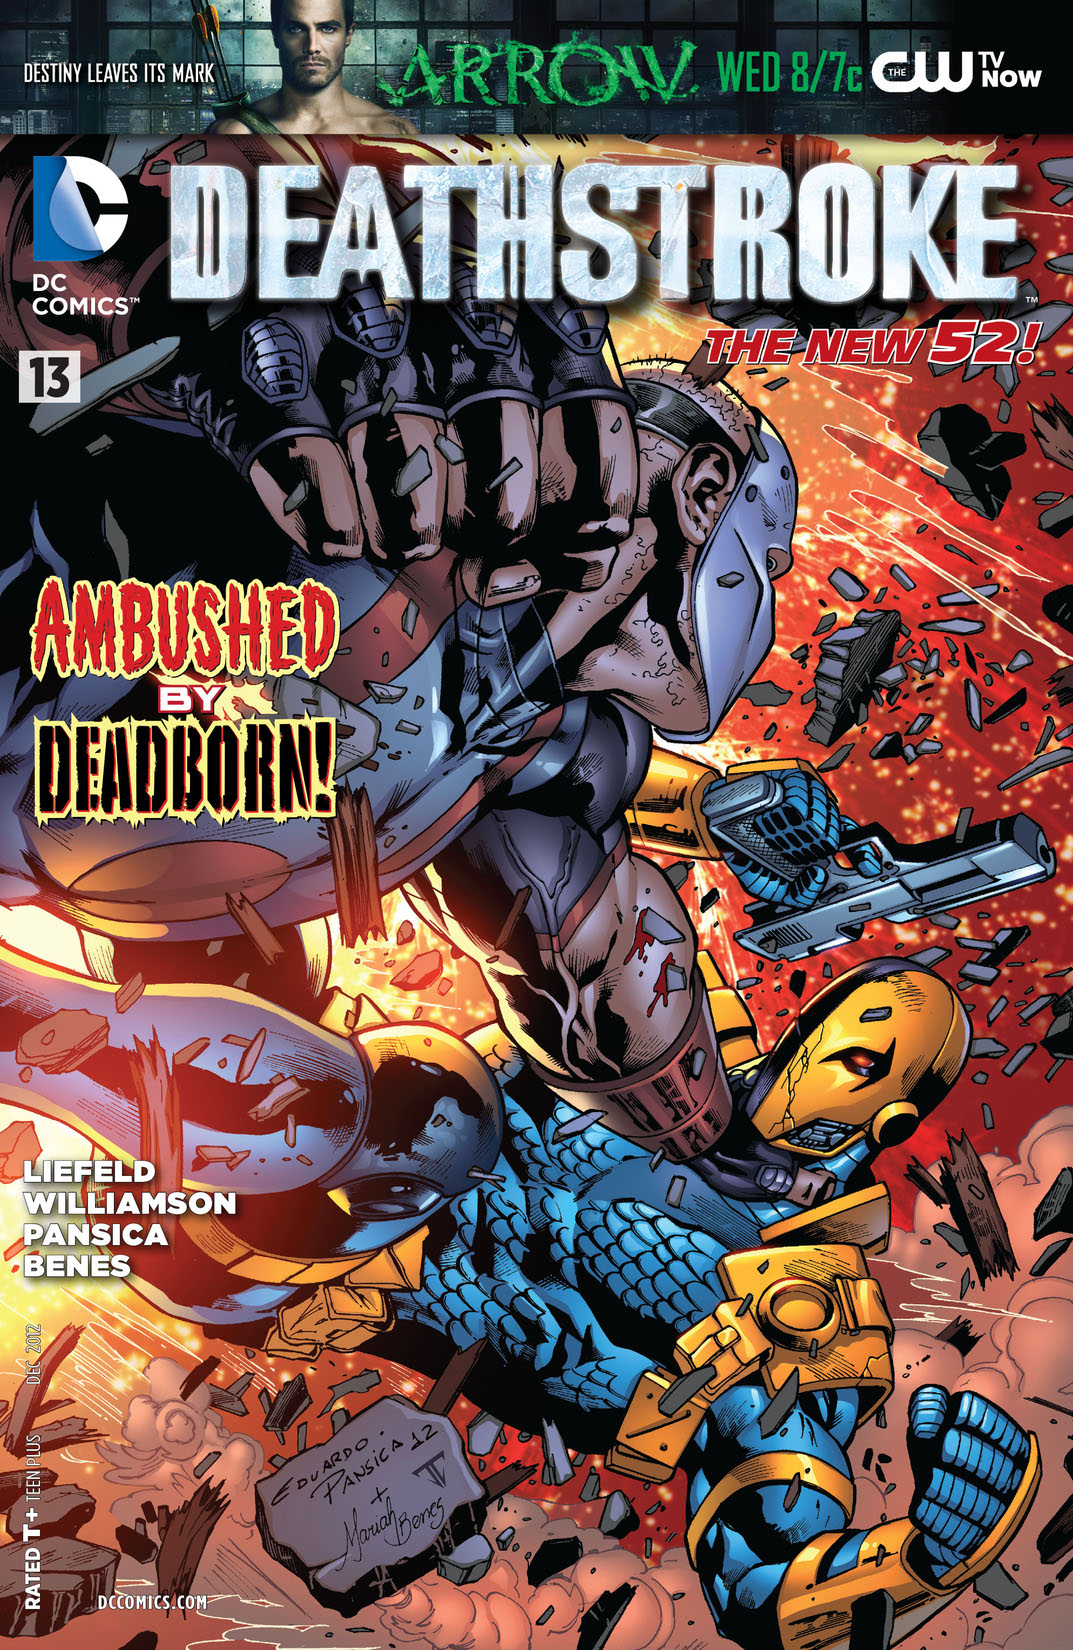 Deathstroke (2011-) #13 preview images